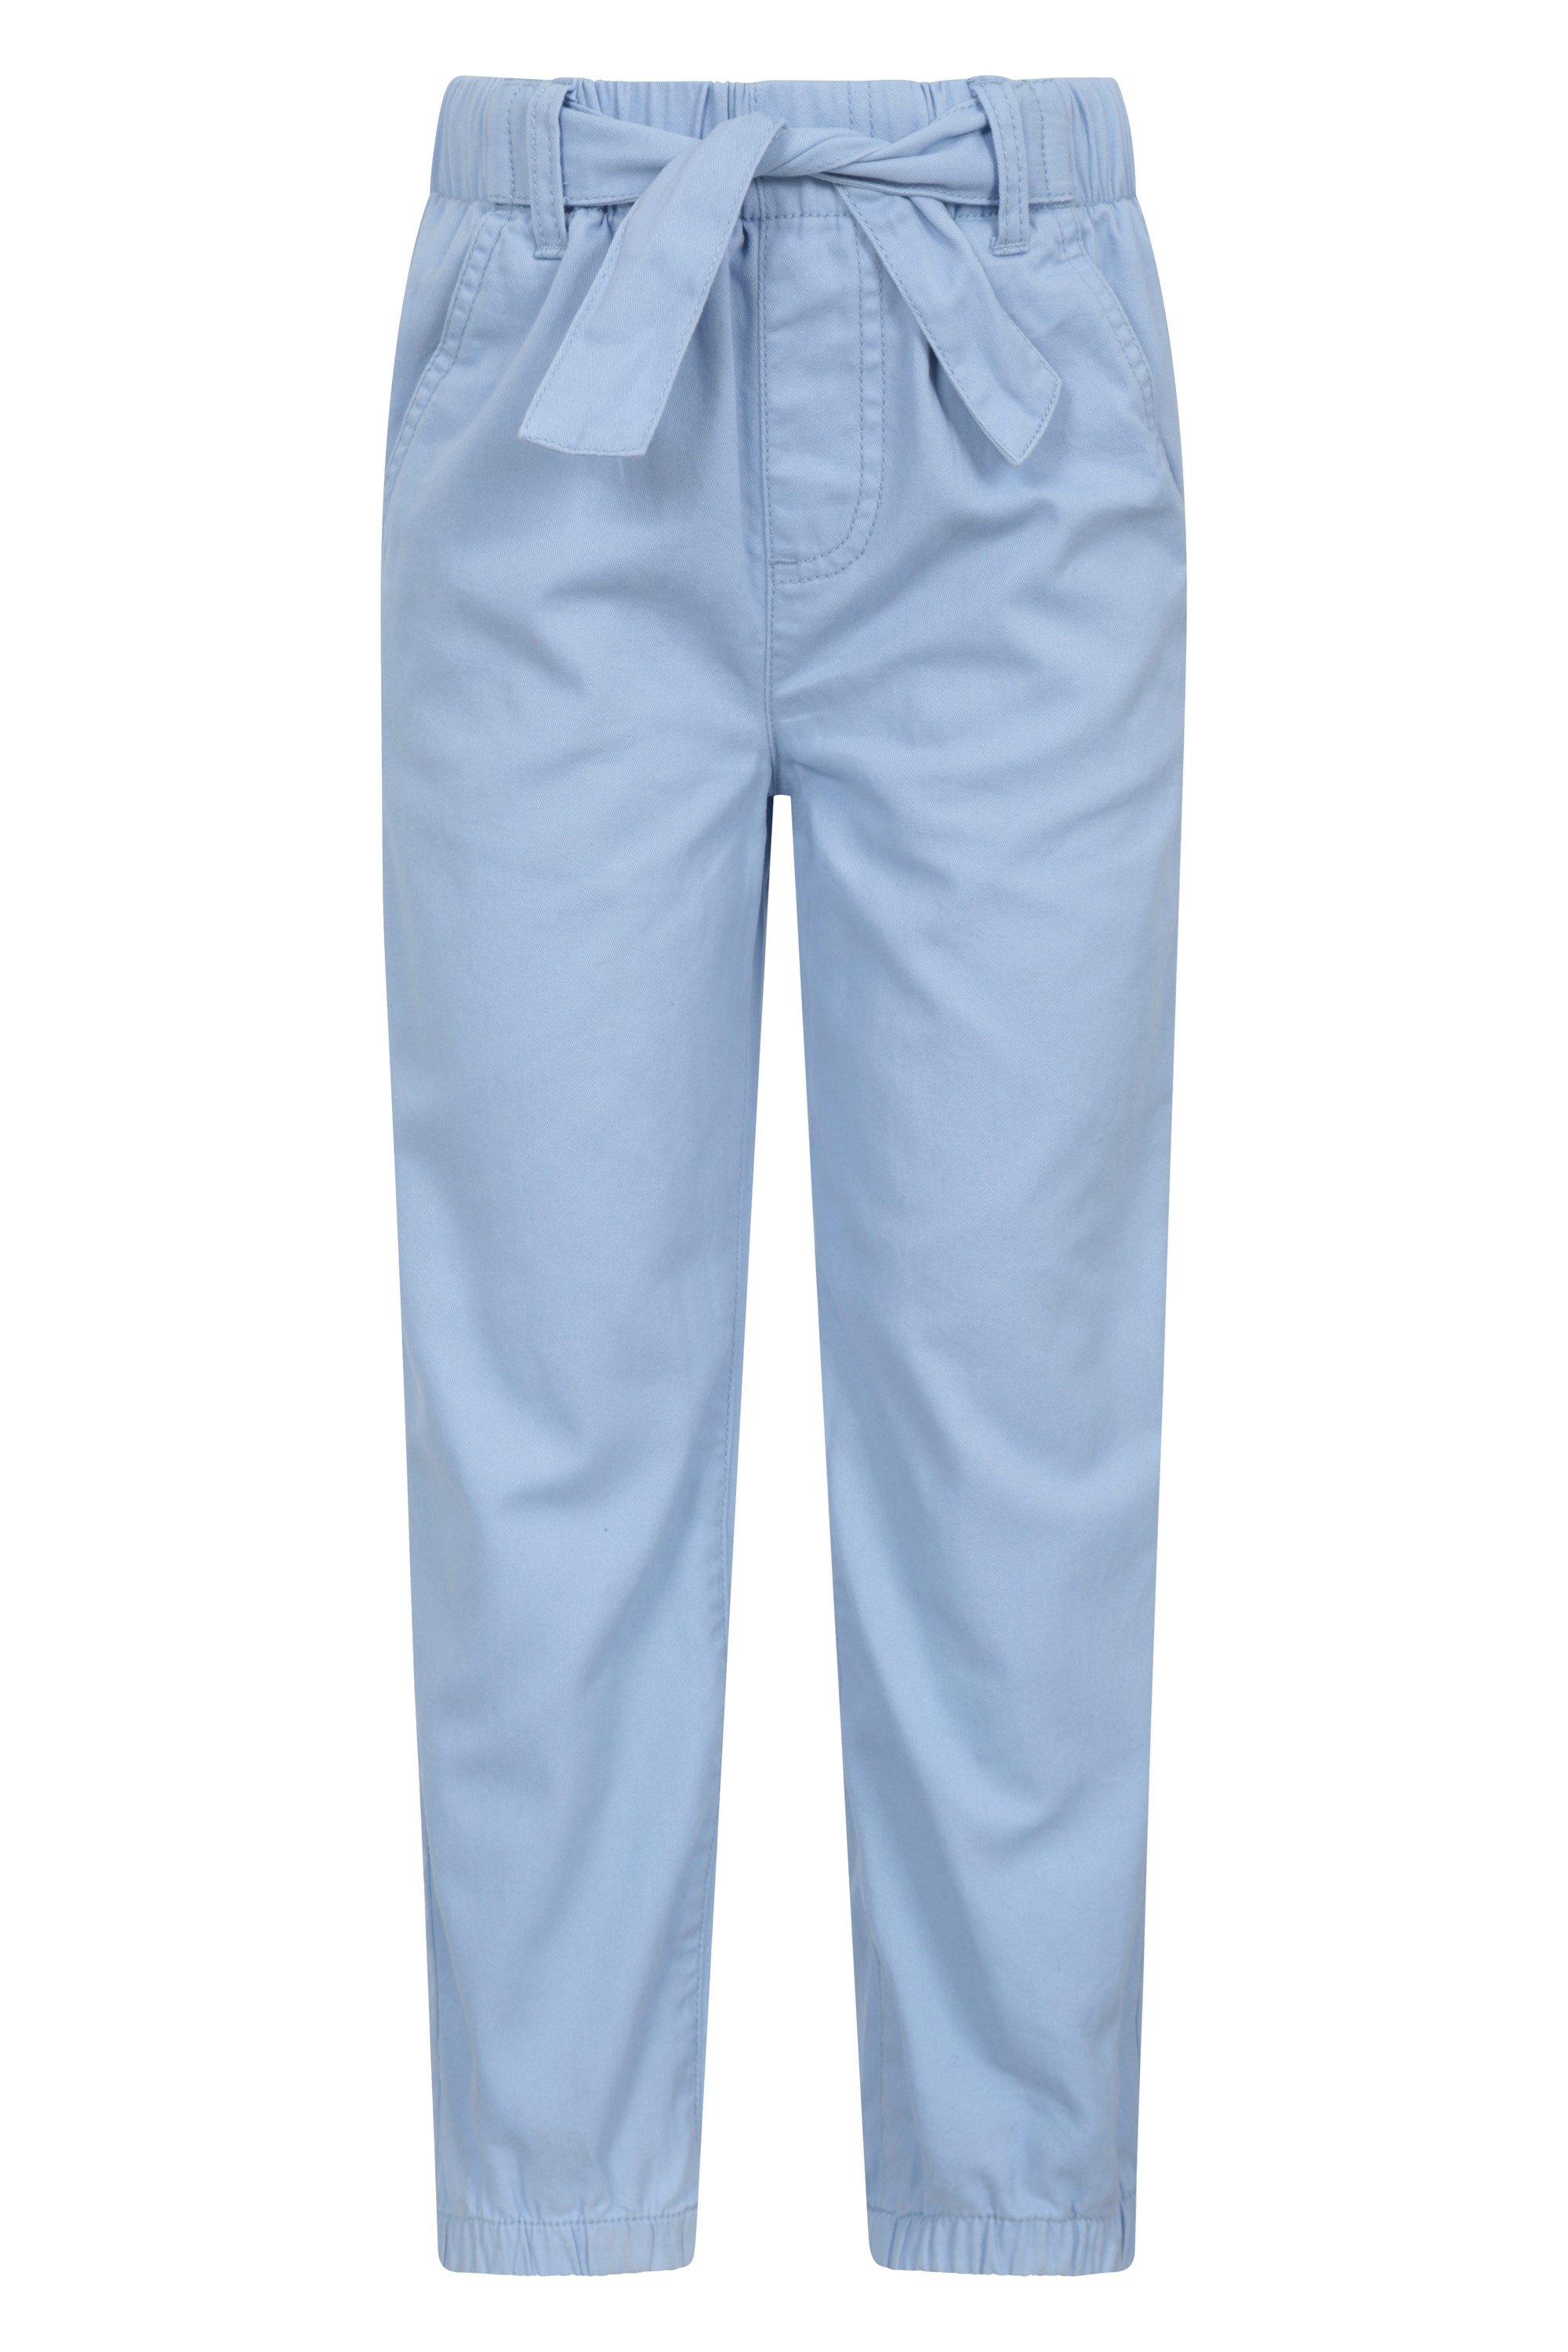 Kids Belted Organic Trousers - Light Blue